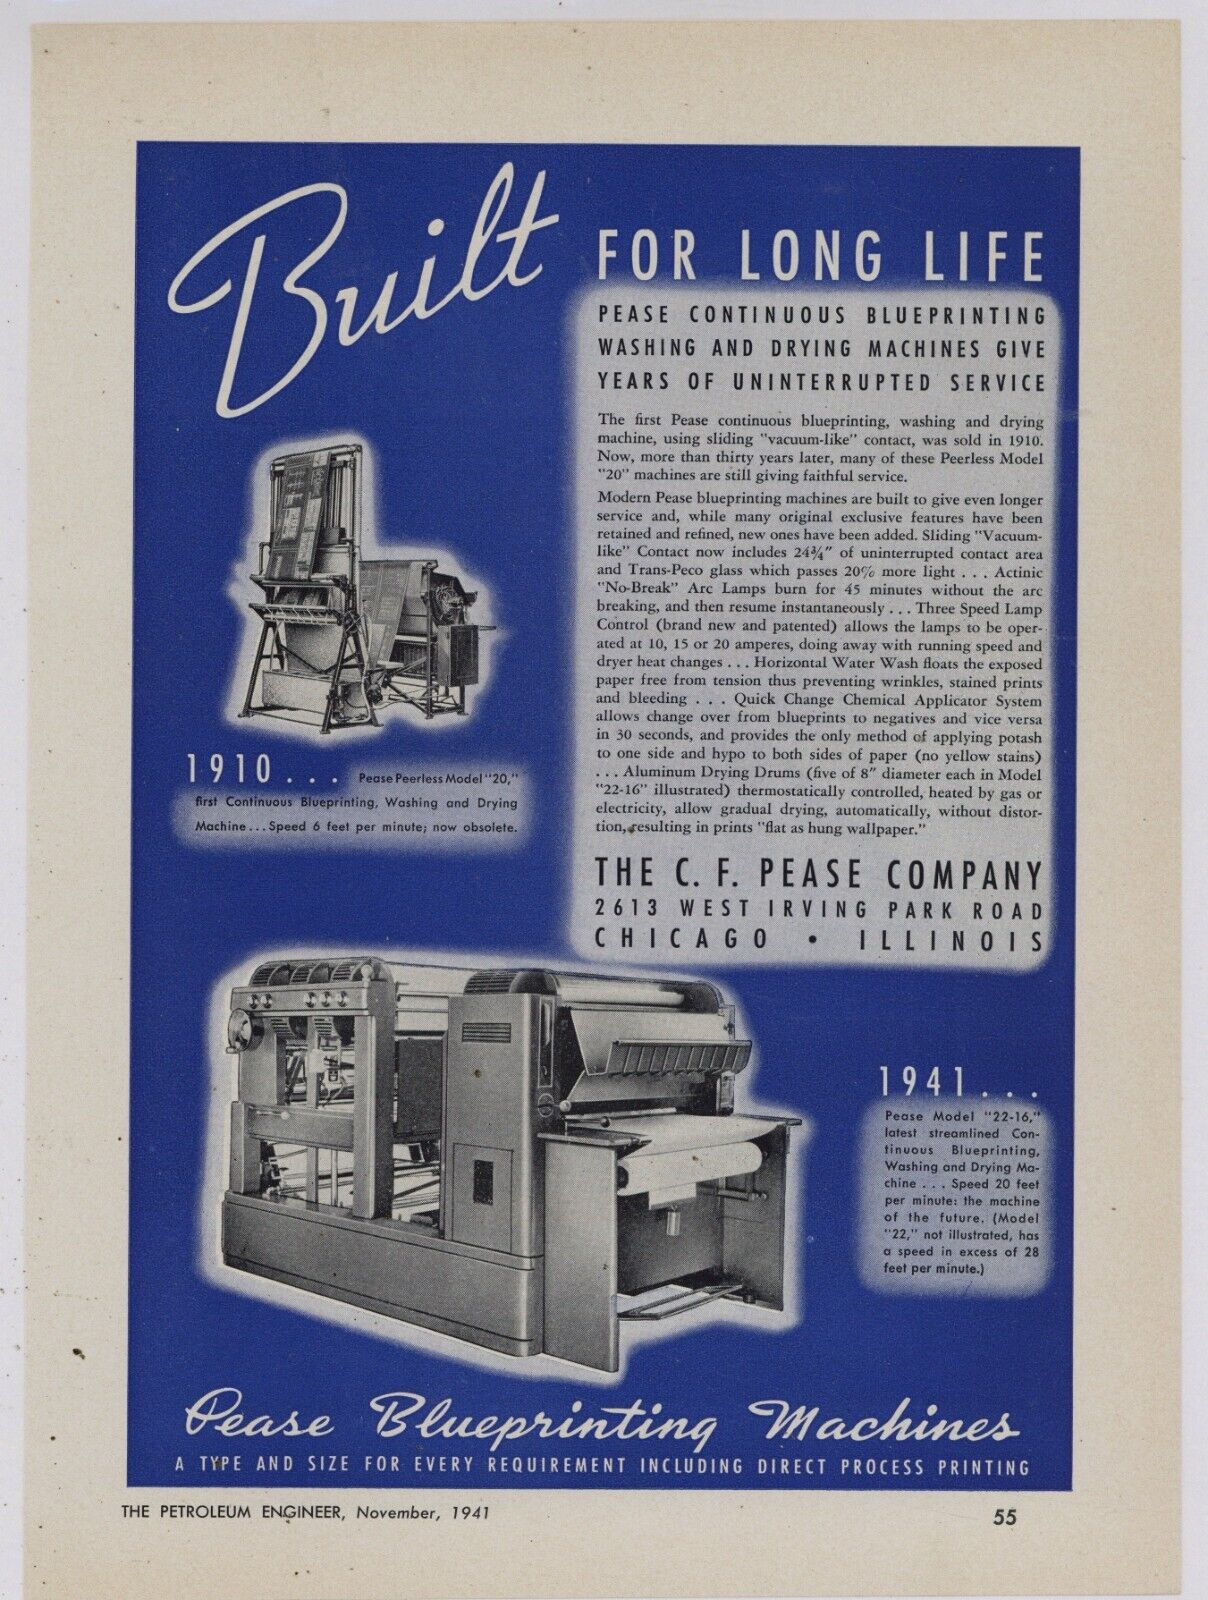 1941 C.F. Pease Co. Ad: Pease Blueprinting Machines - 1910, 41 Models Pictured